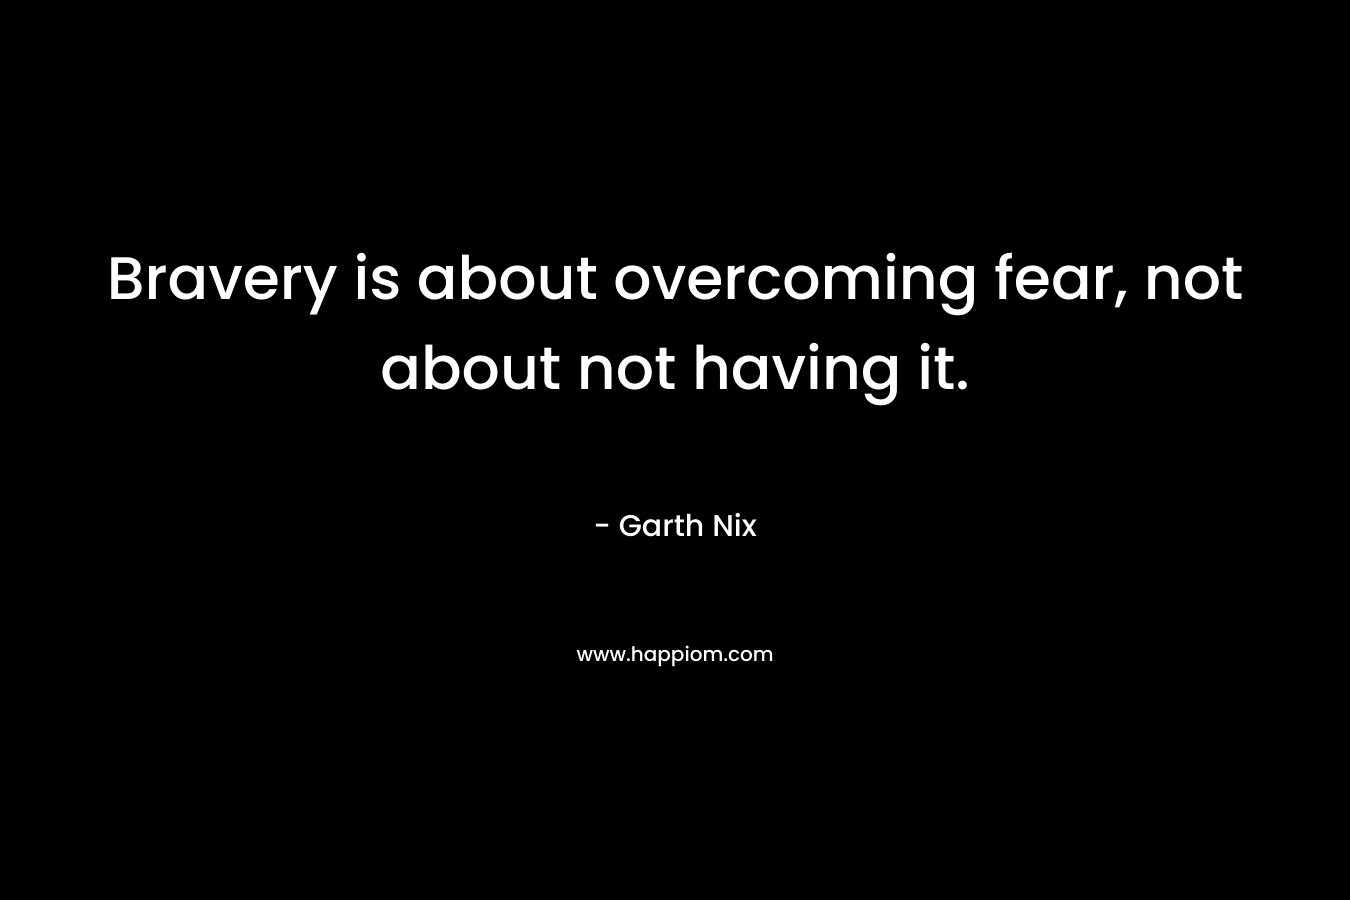 Bravery is about overcoming fear, not about not having it. – Garth Nix